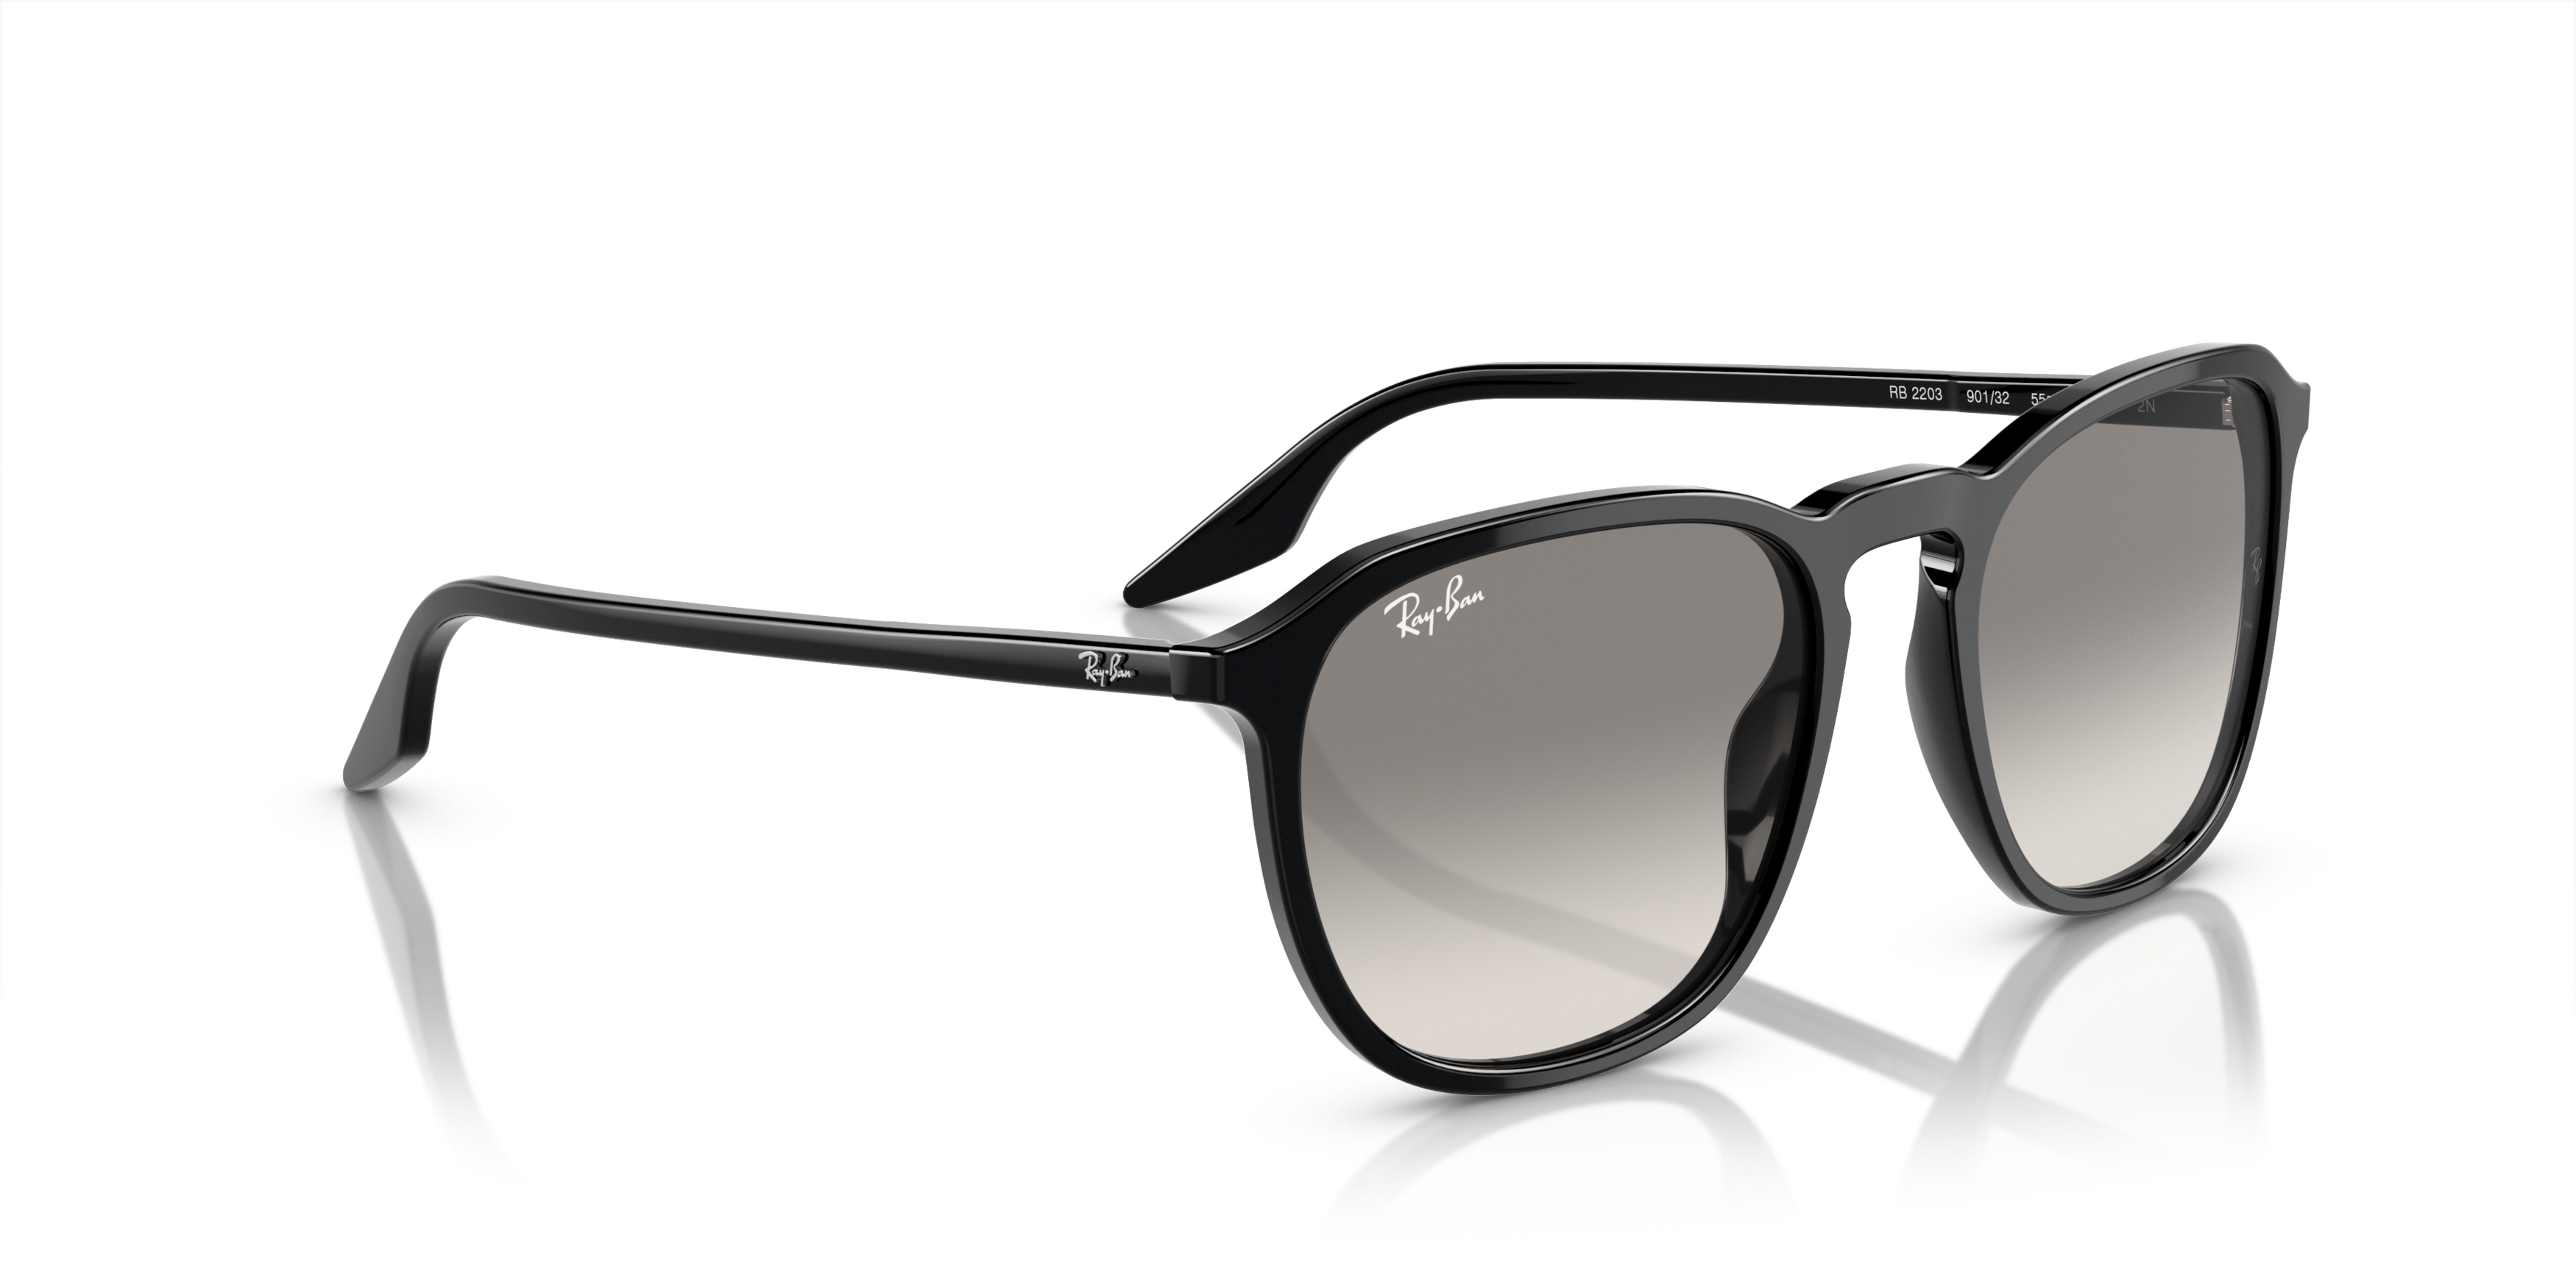 [products.image.angle_right01] Ray-Ban RB2203 901/32